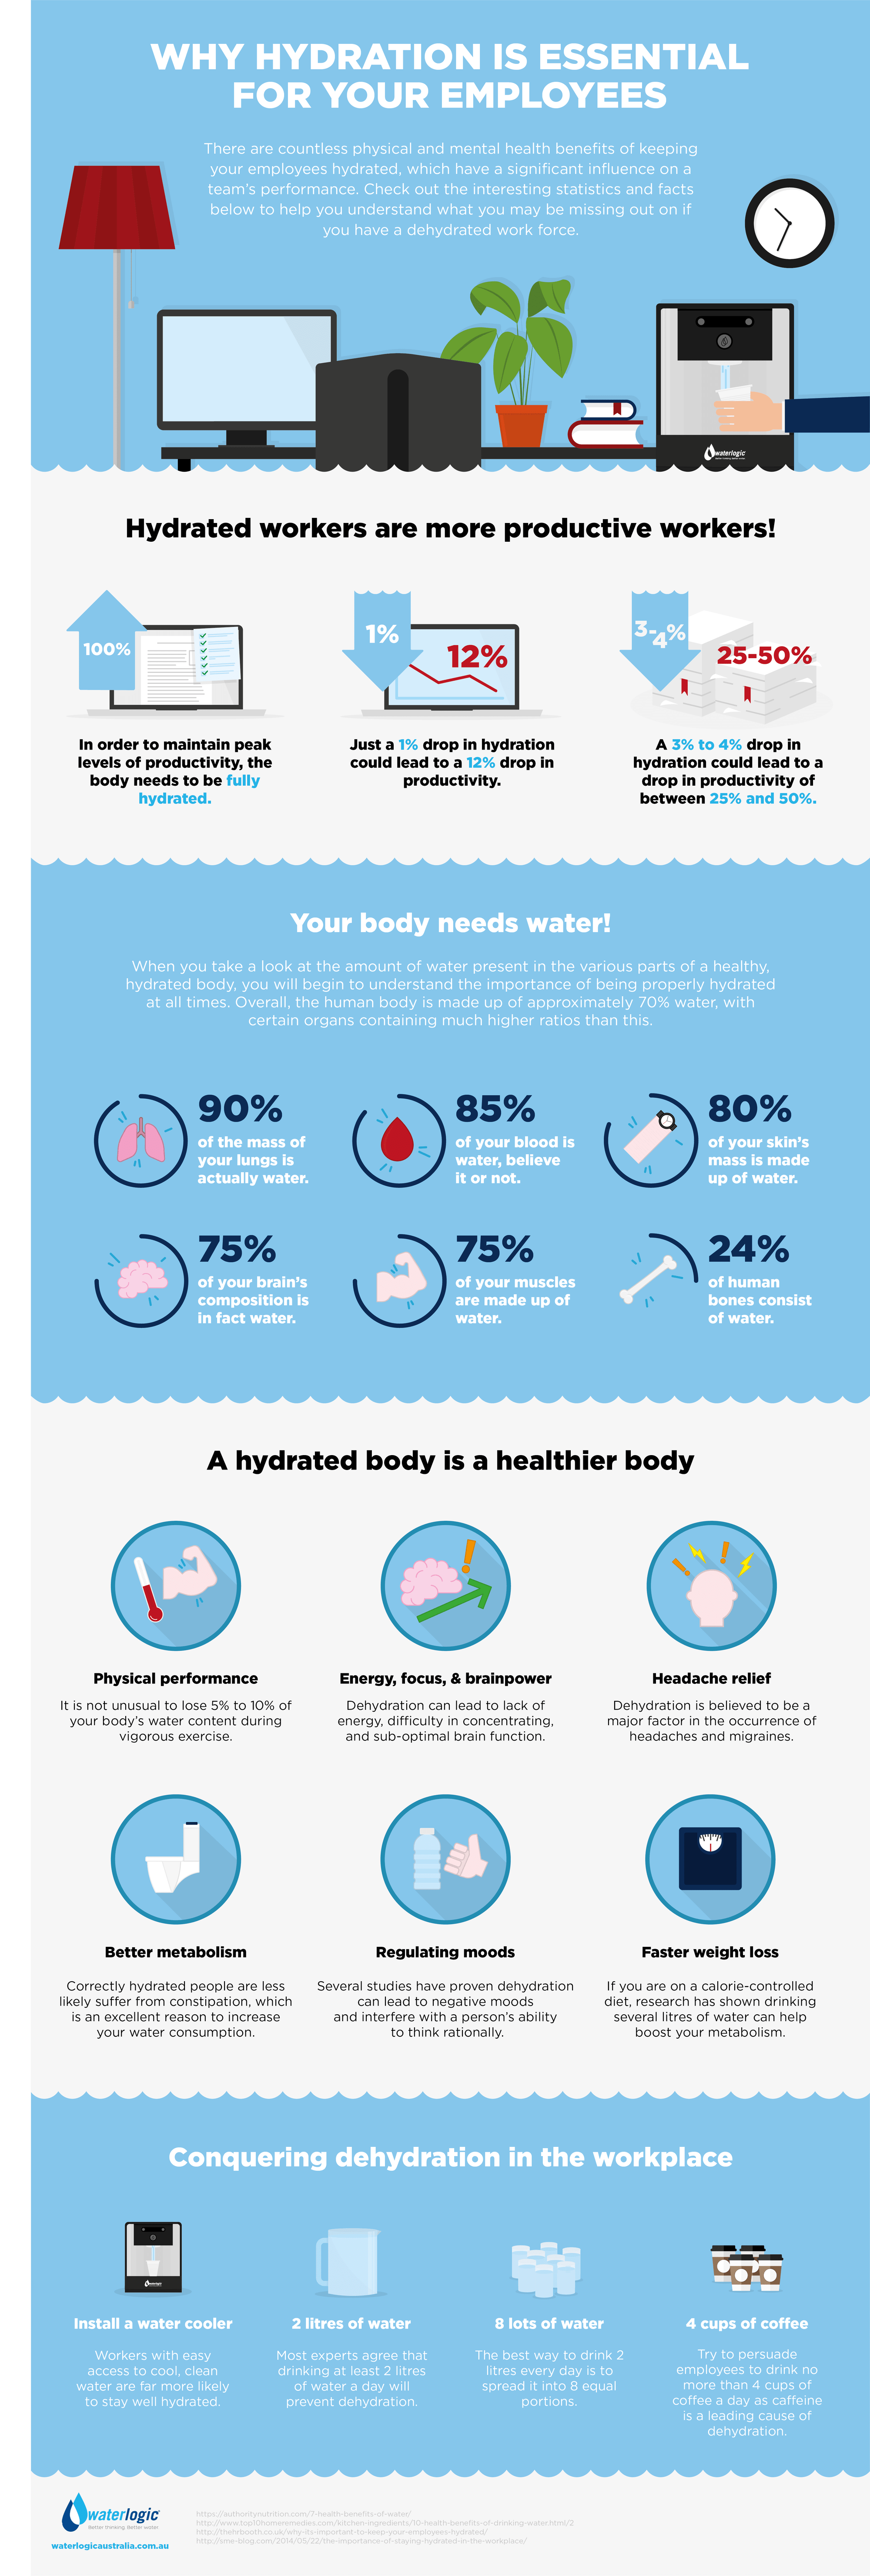 INFOGRAPHIC- Why Hydration is Essential for Your Employees